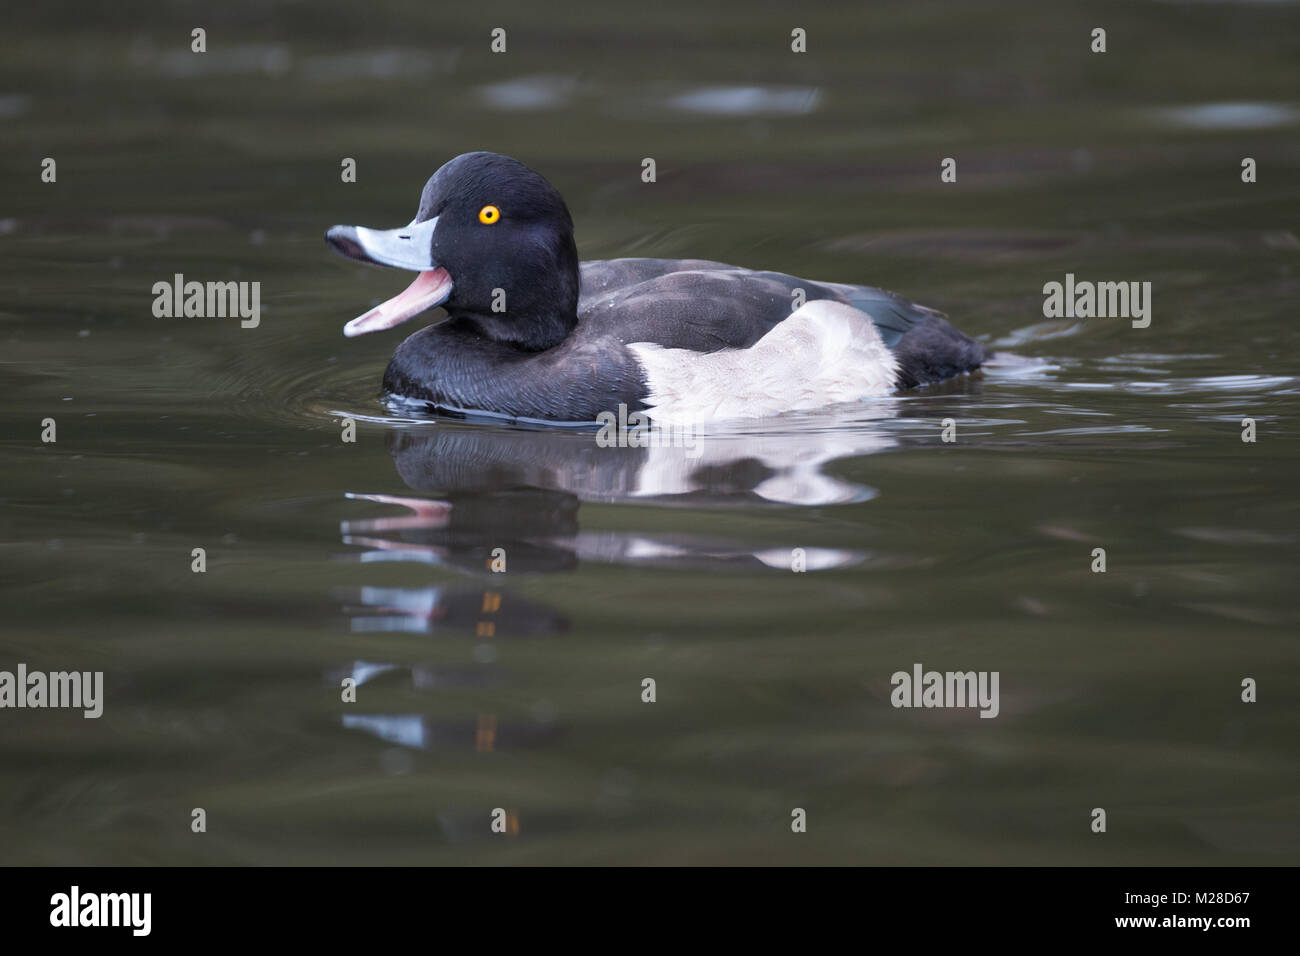 tufted duck swimming with mouth open showing full body Stock Photo